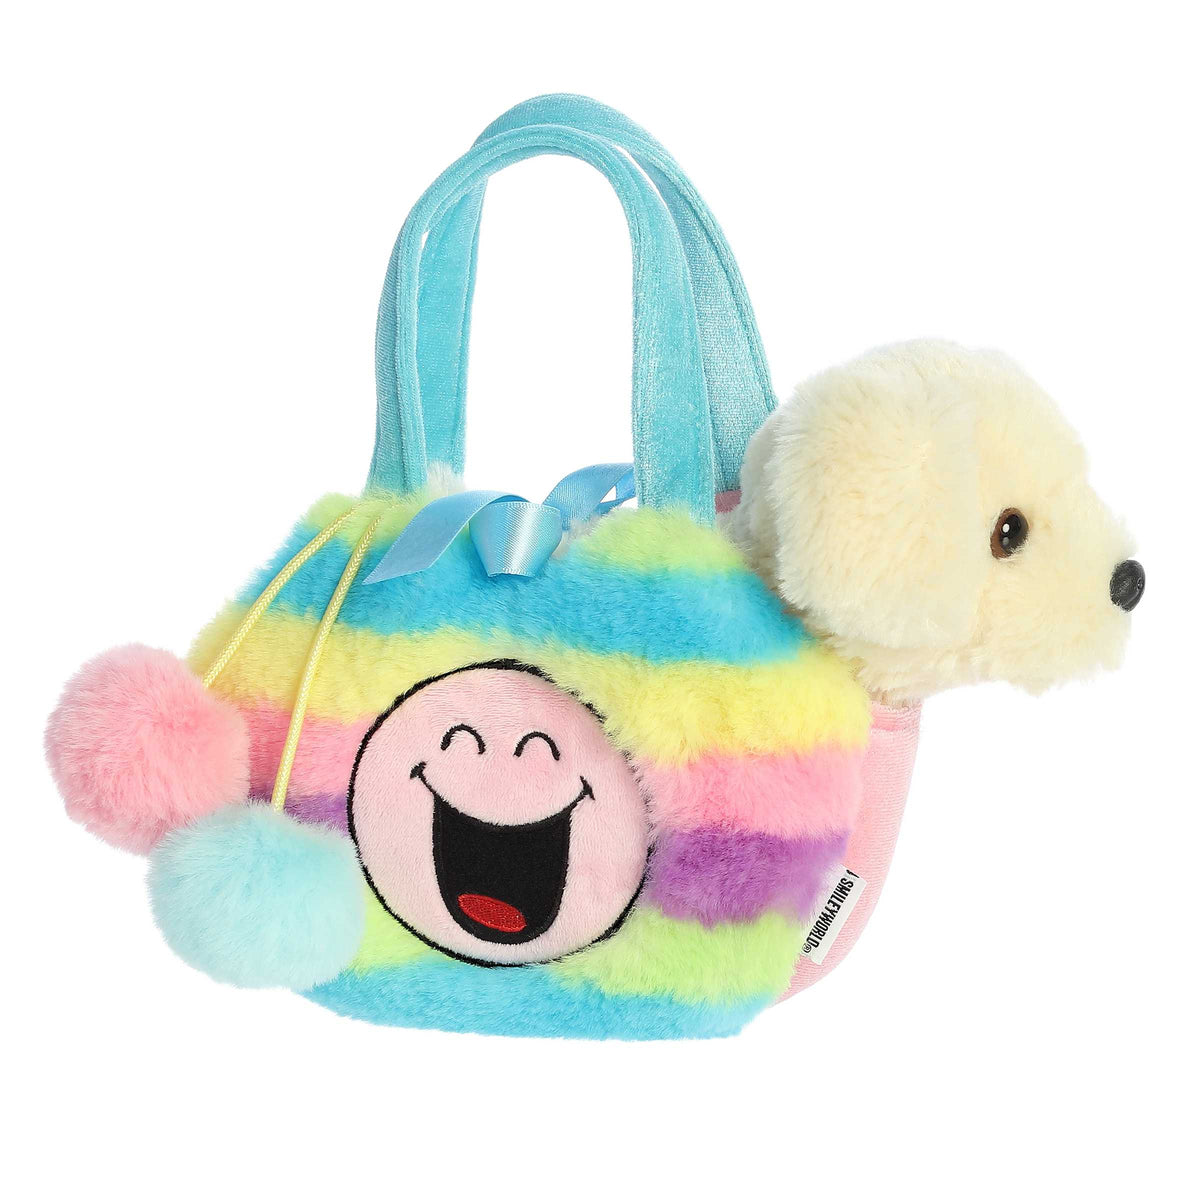 Rainbow SmileyWorld Plush Carrier, cheerful with a friendly smile and includes a fluffy puppy plush